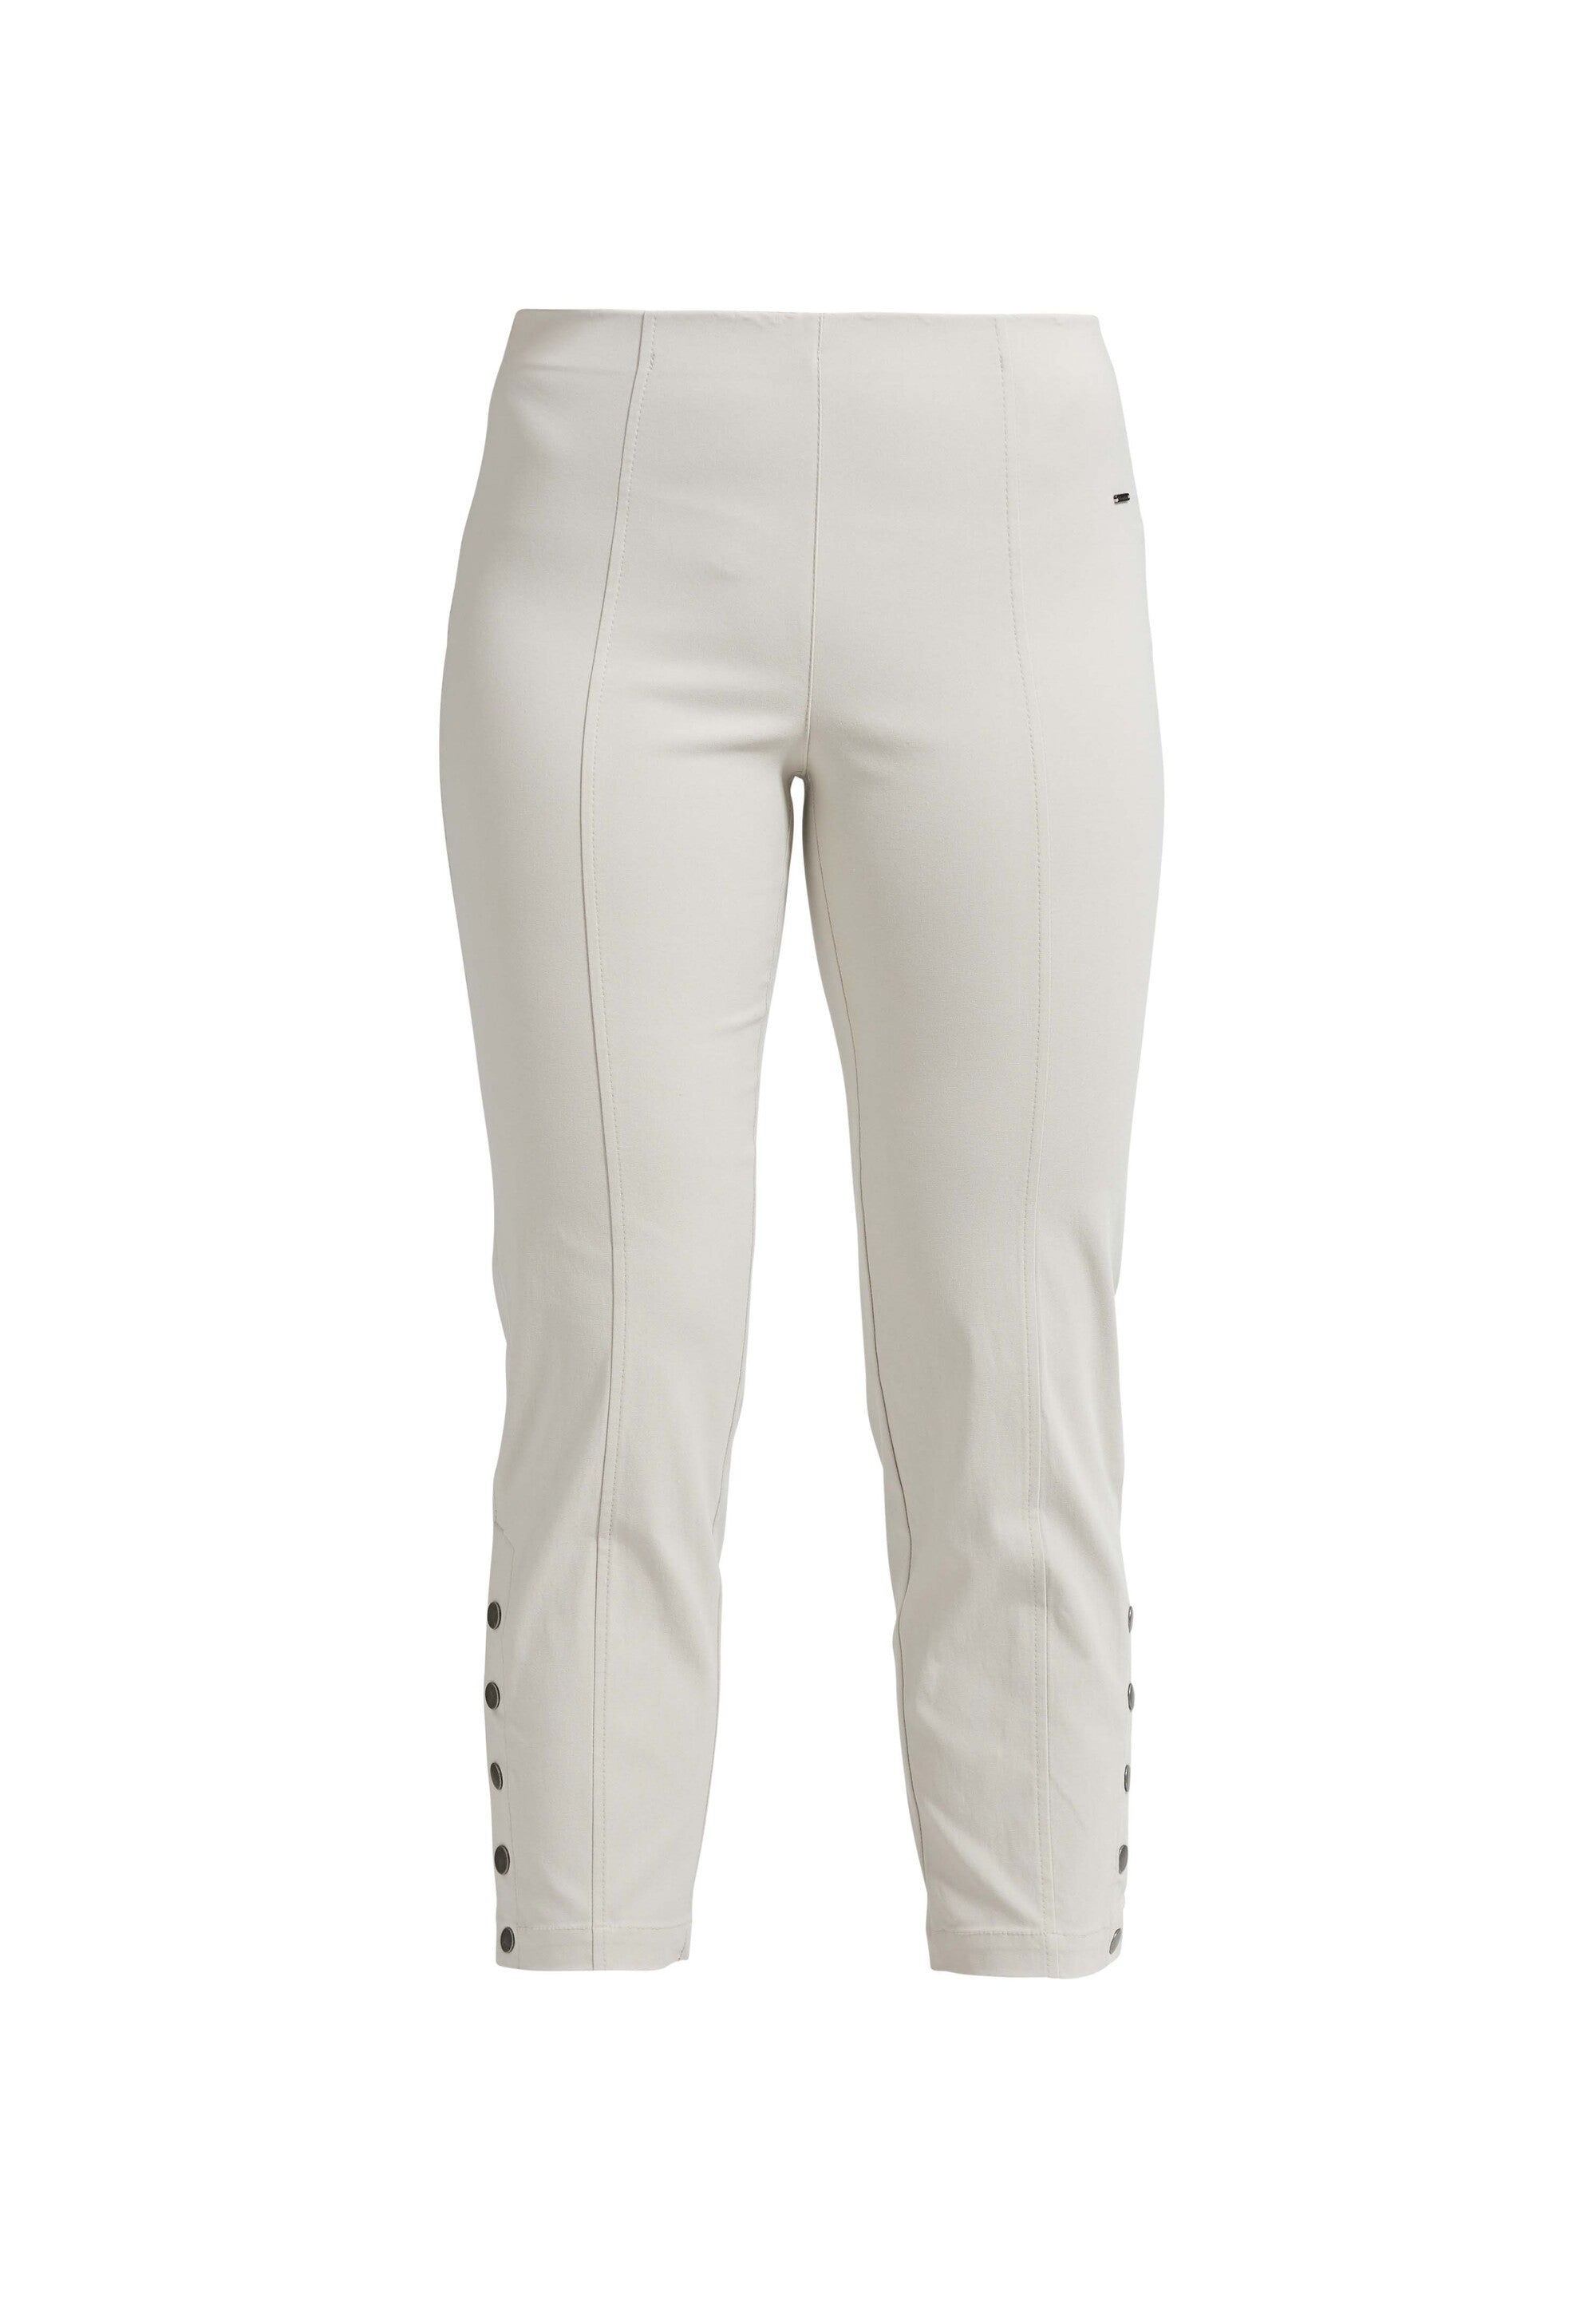 LAURIE Polly Regular Crop Trousers REGULAR 25137 Grey Sand